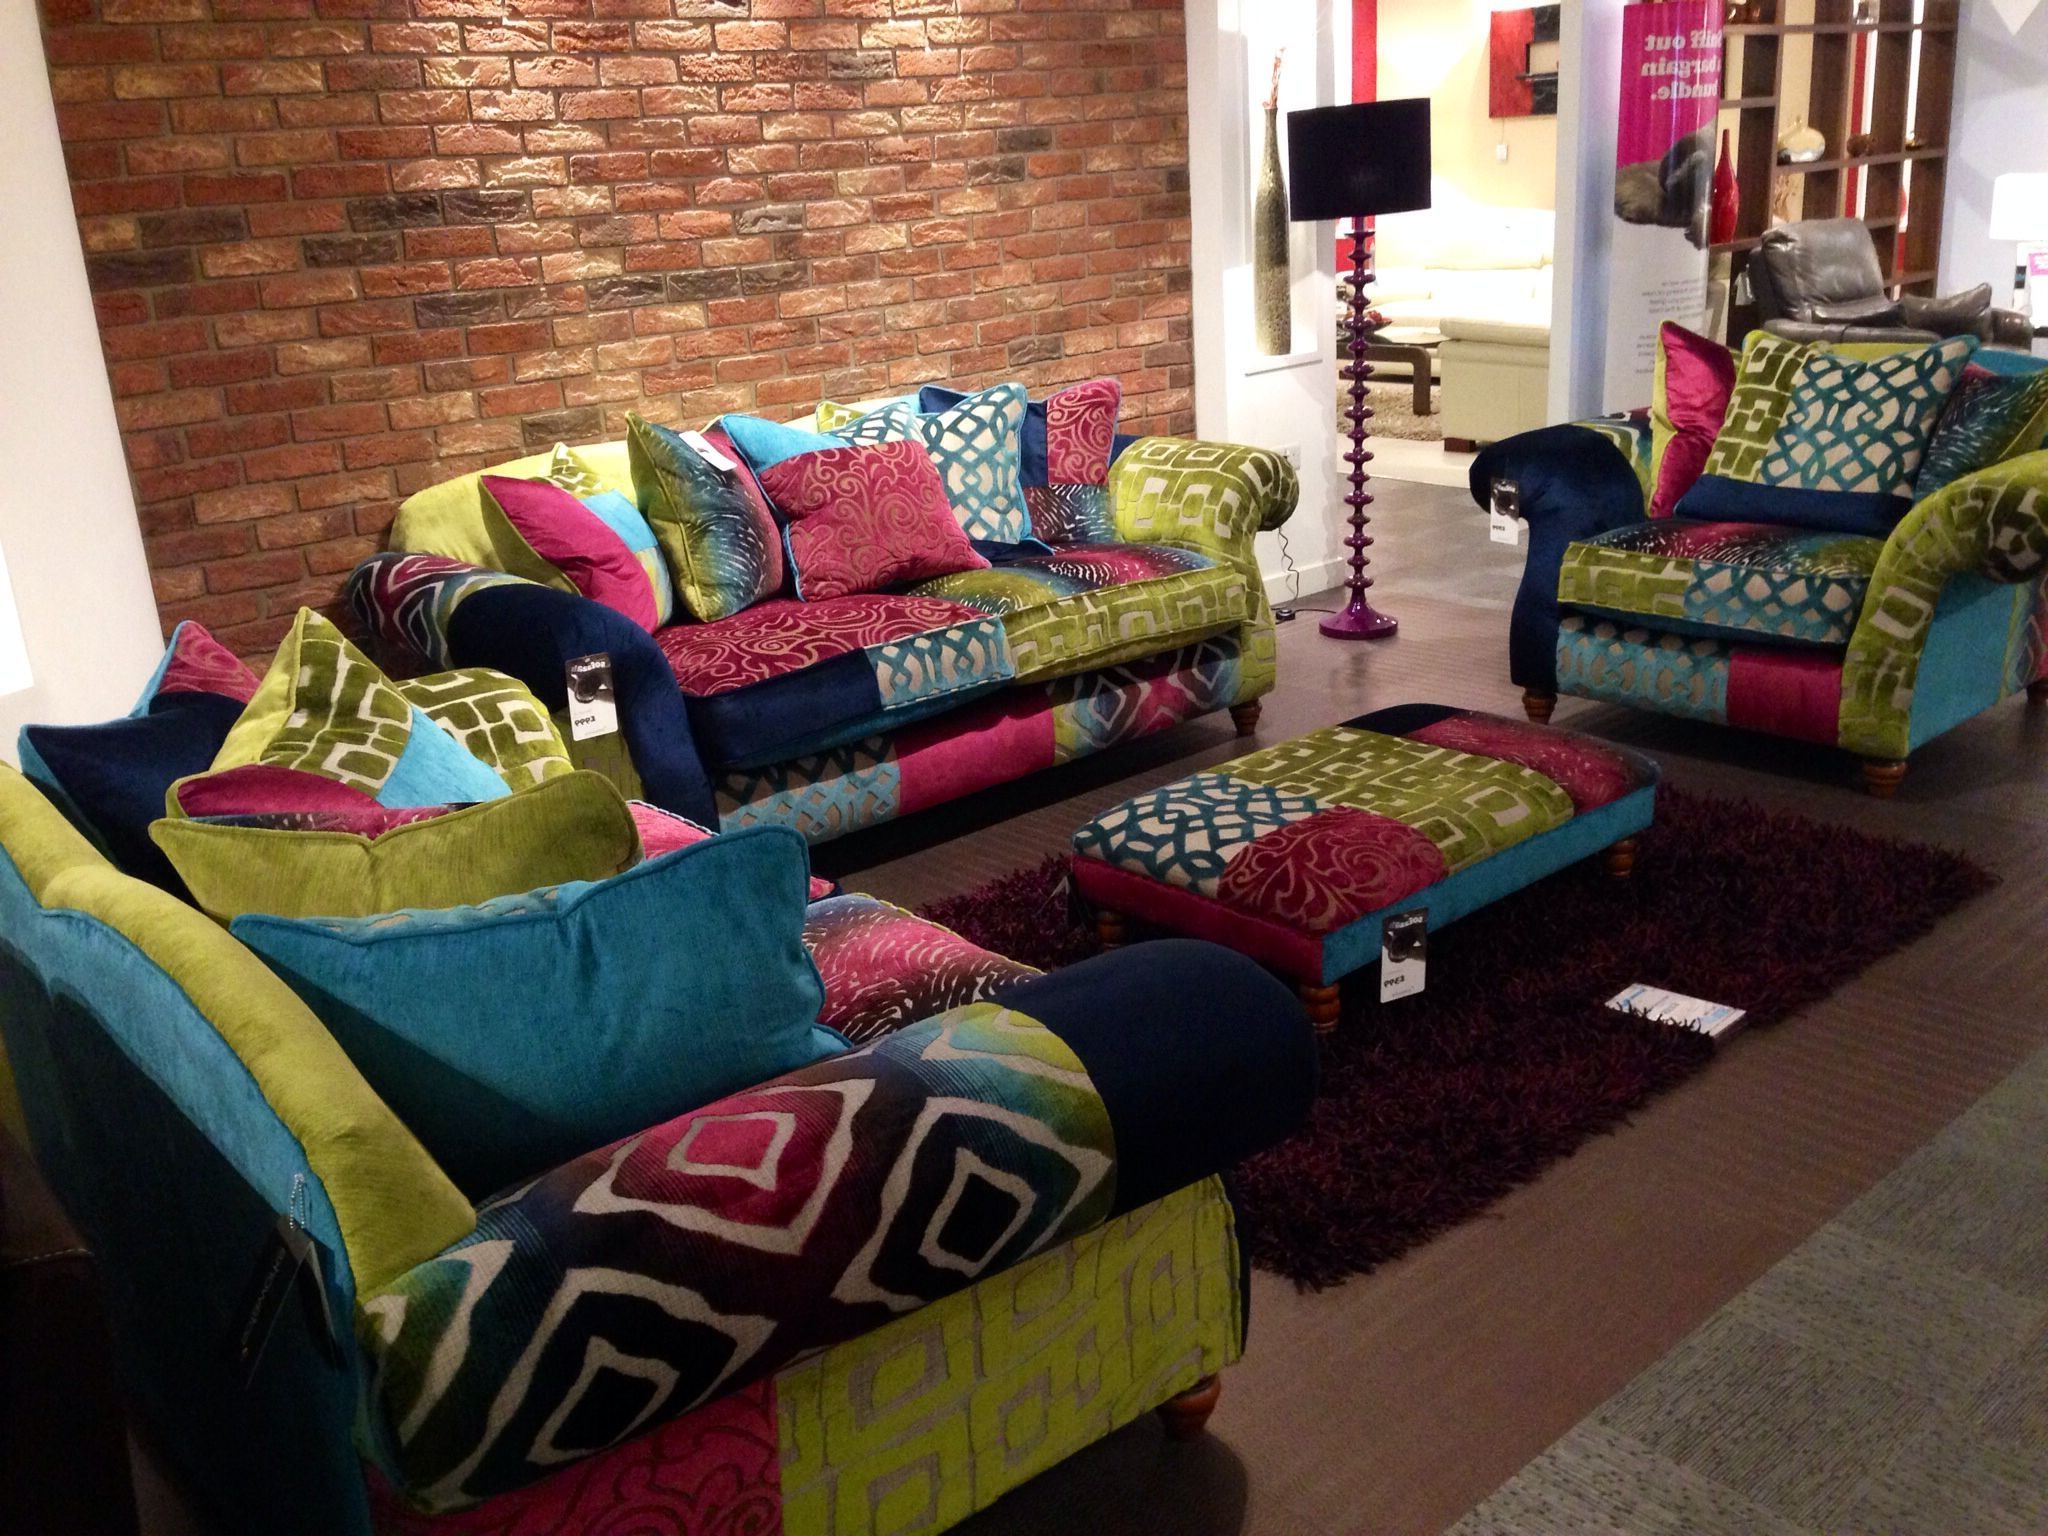 2017 7 Images Multi Coloured Sofas And Review – Alqu Blog In Sofas In Multiple Colors (View 3 of 15)